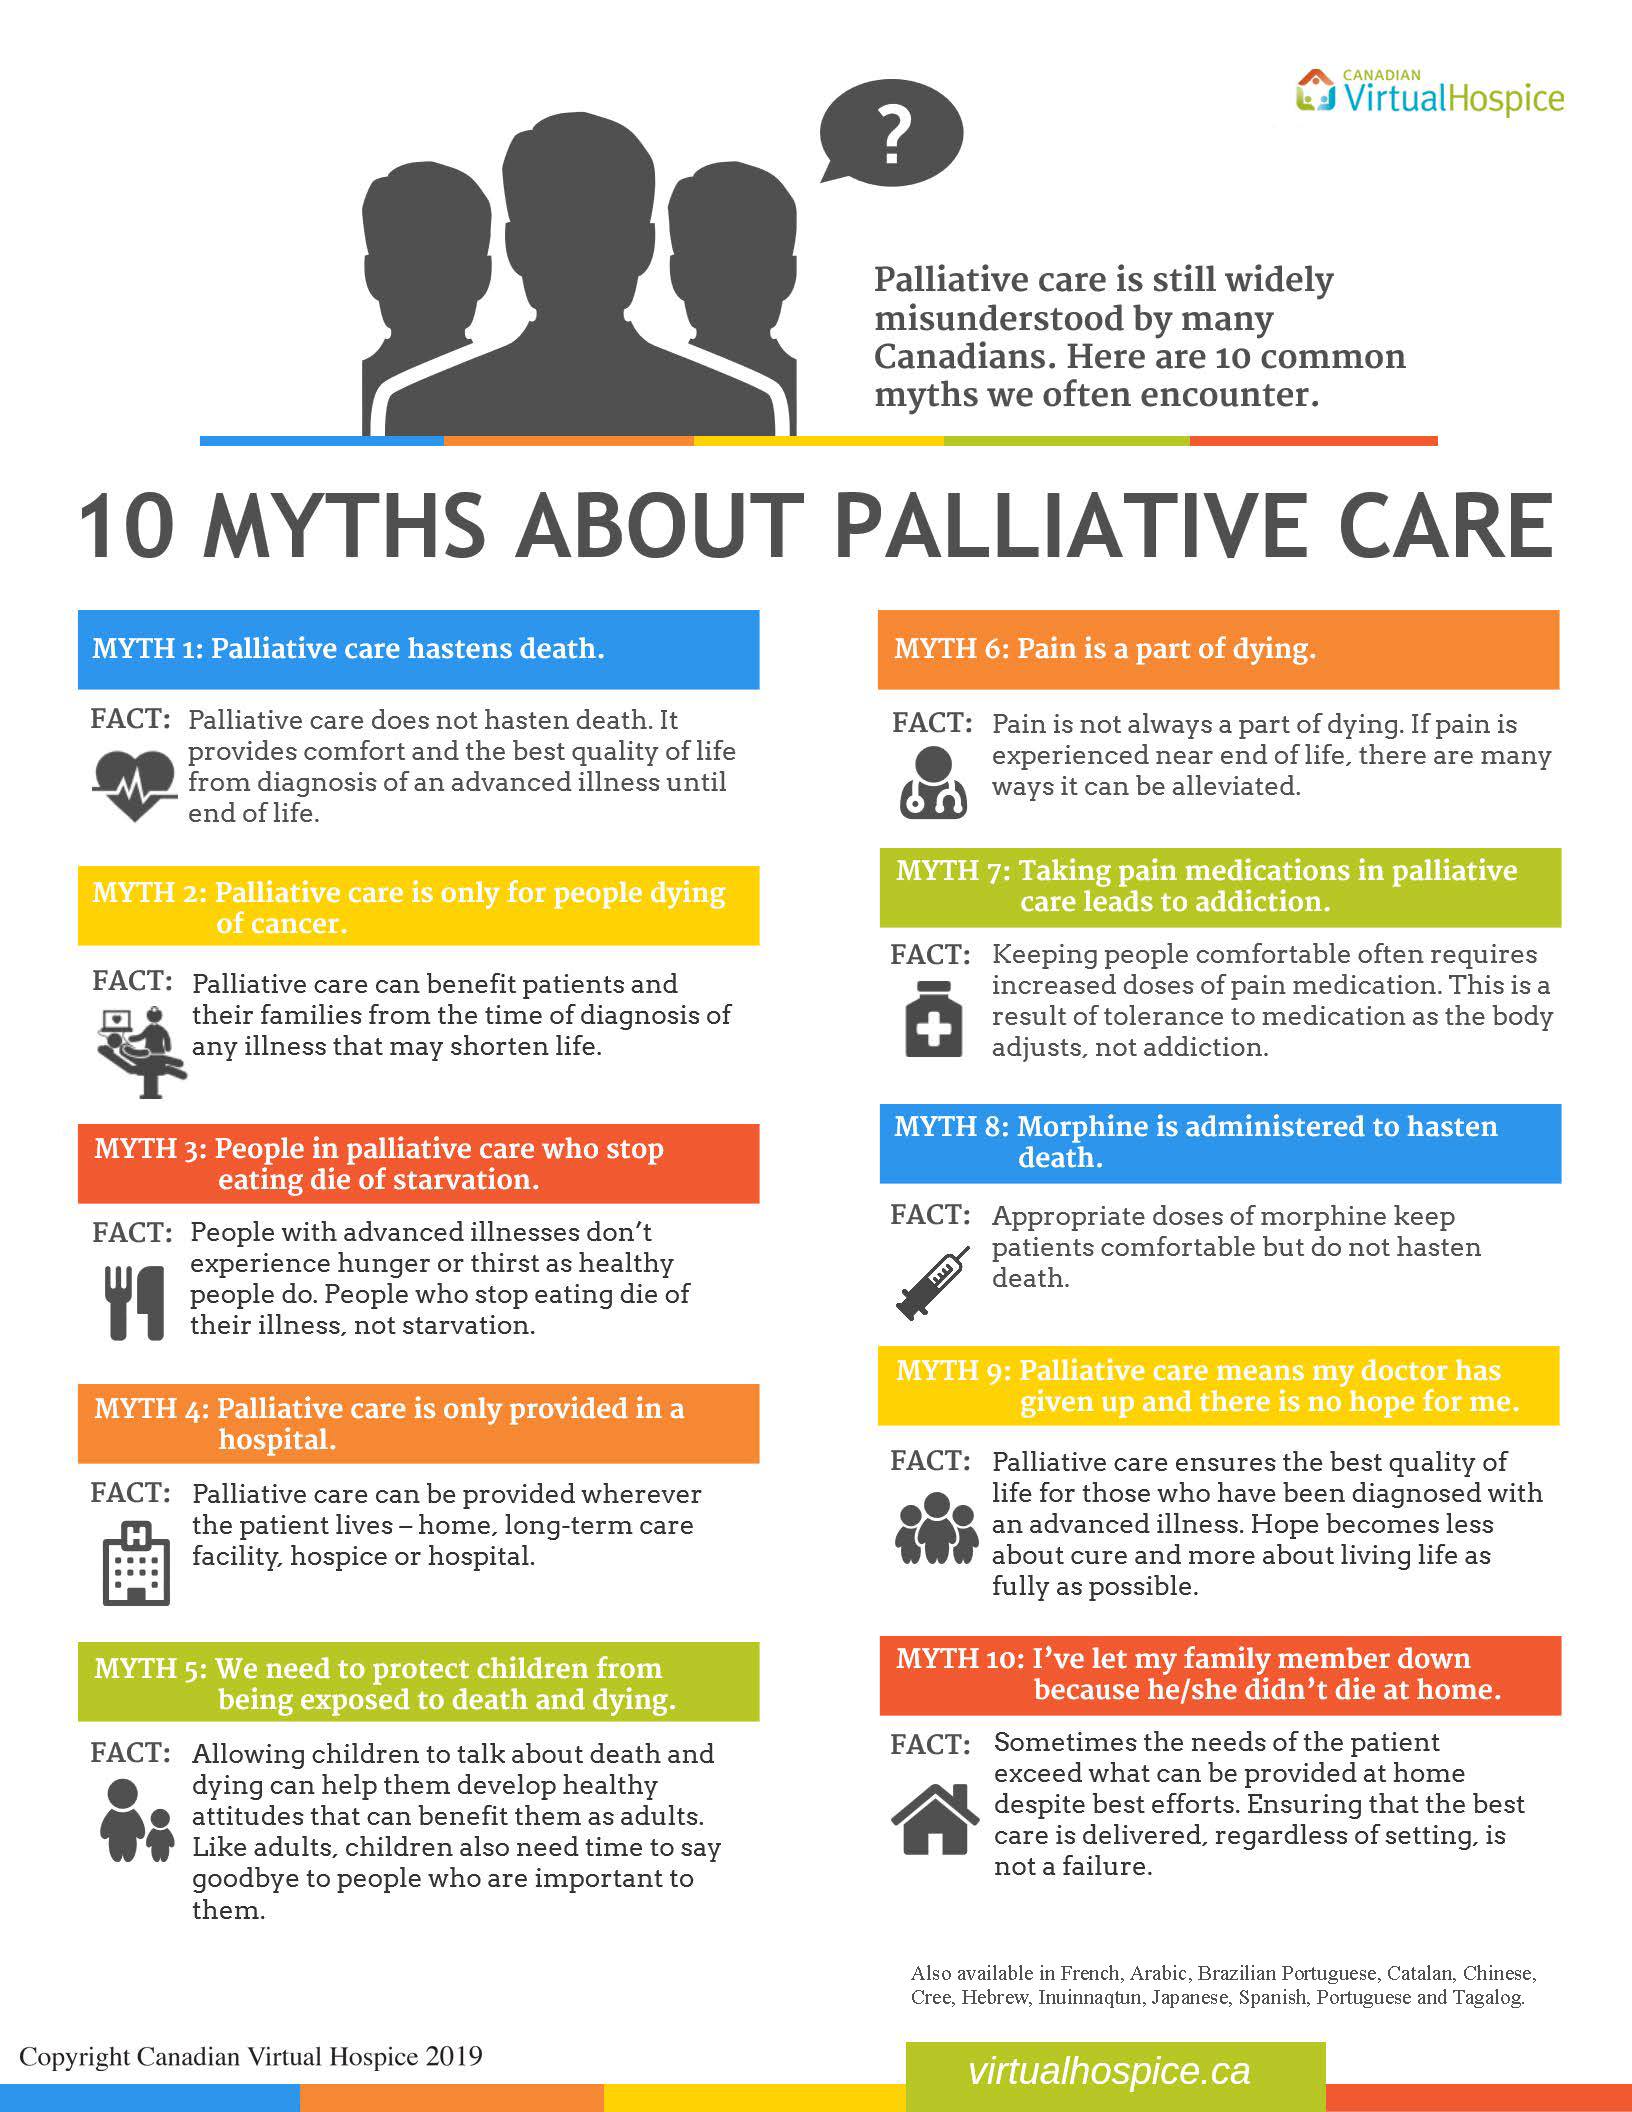 Infographic on 10 myths about palliative care